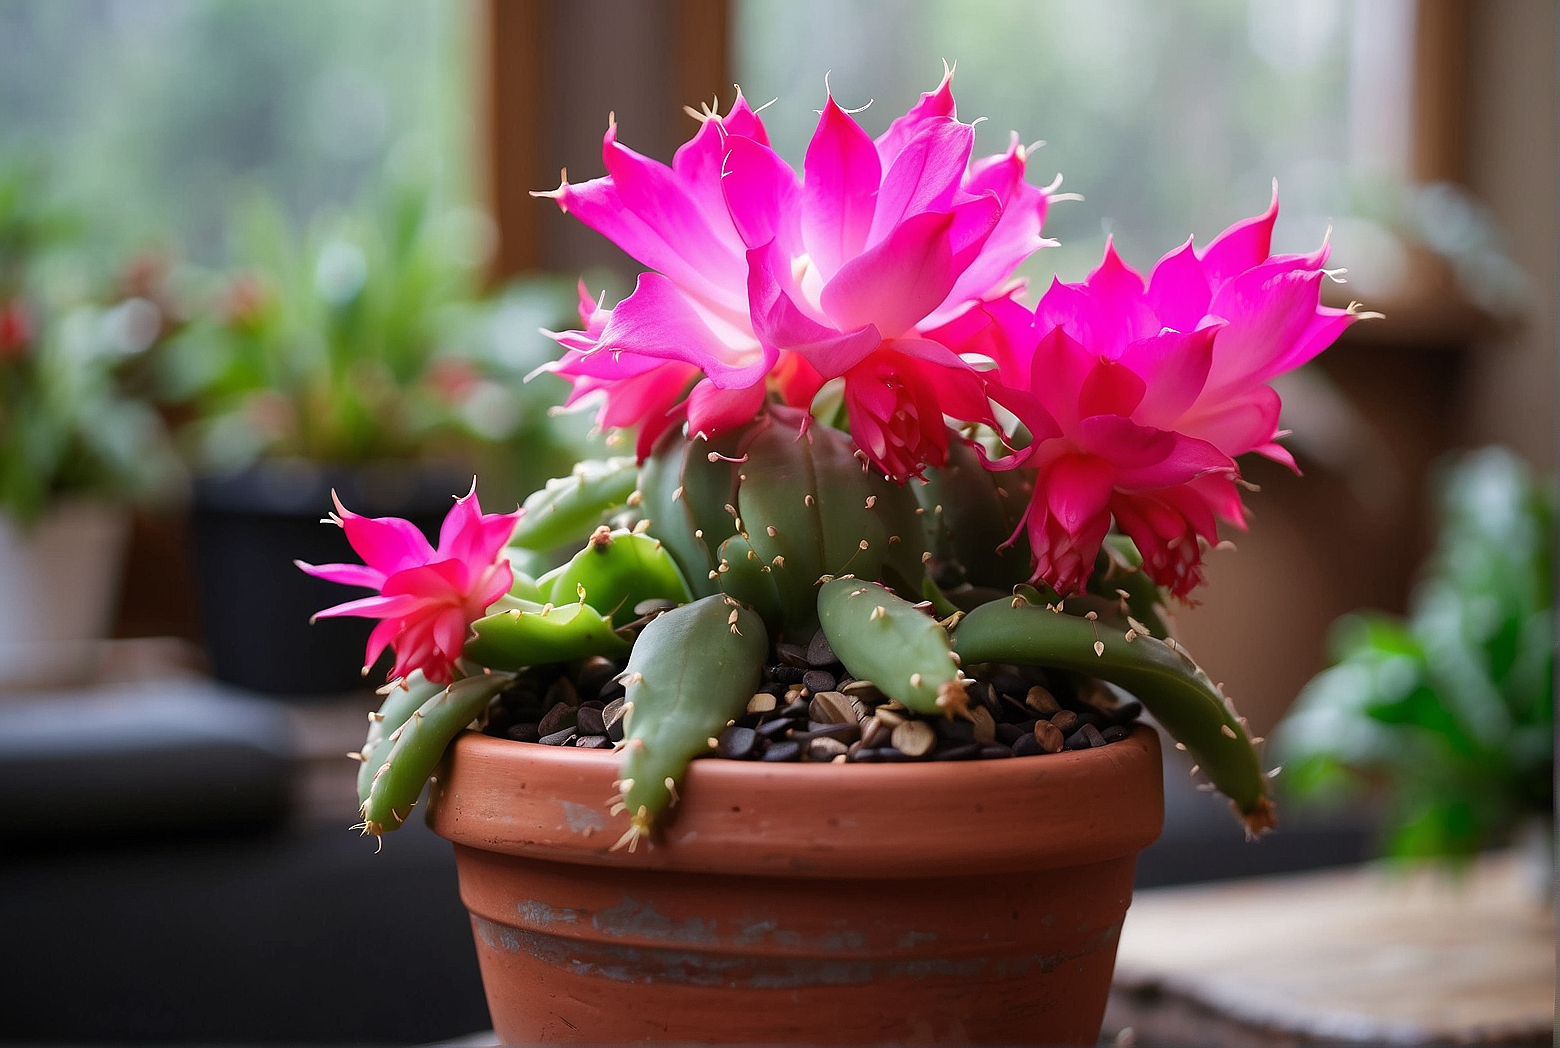 Is a Christmas Cactus Considered a Succulent?